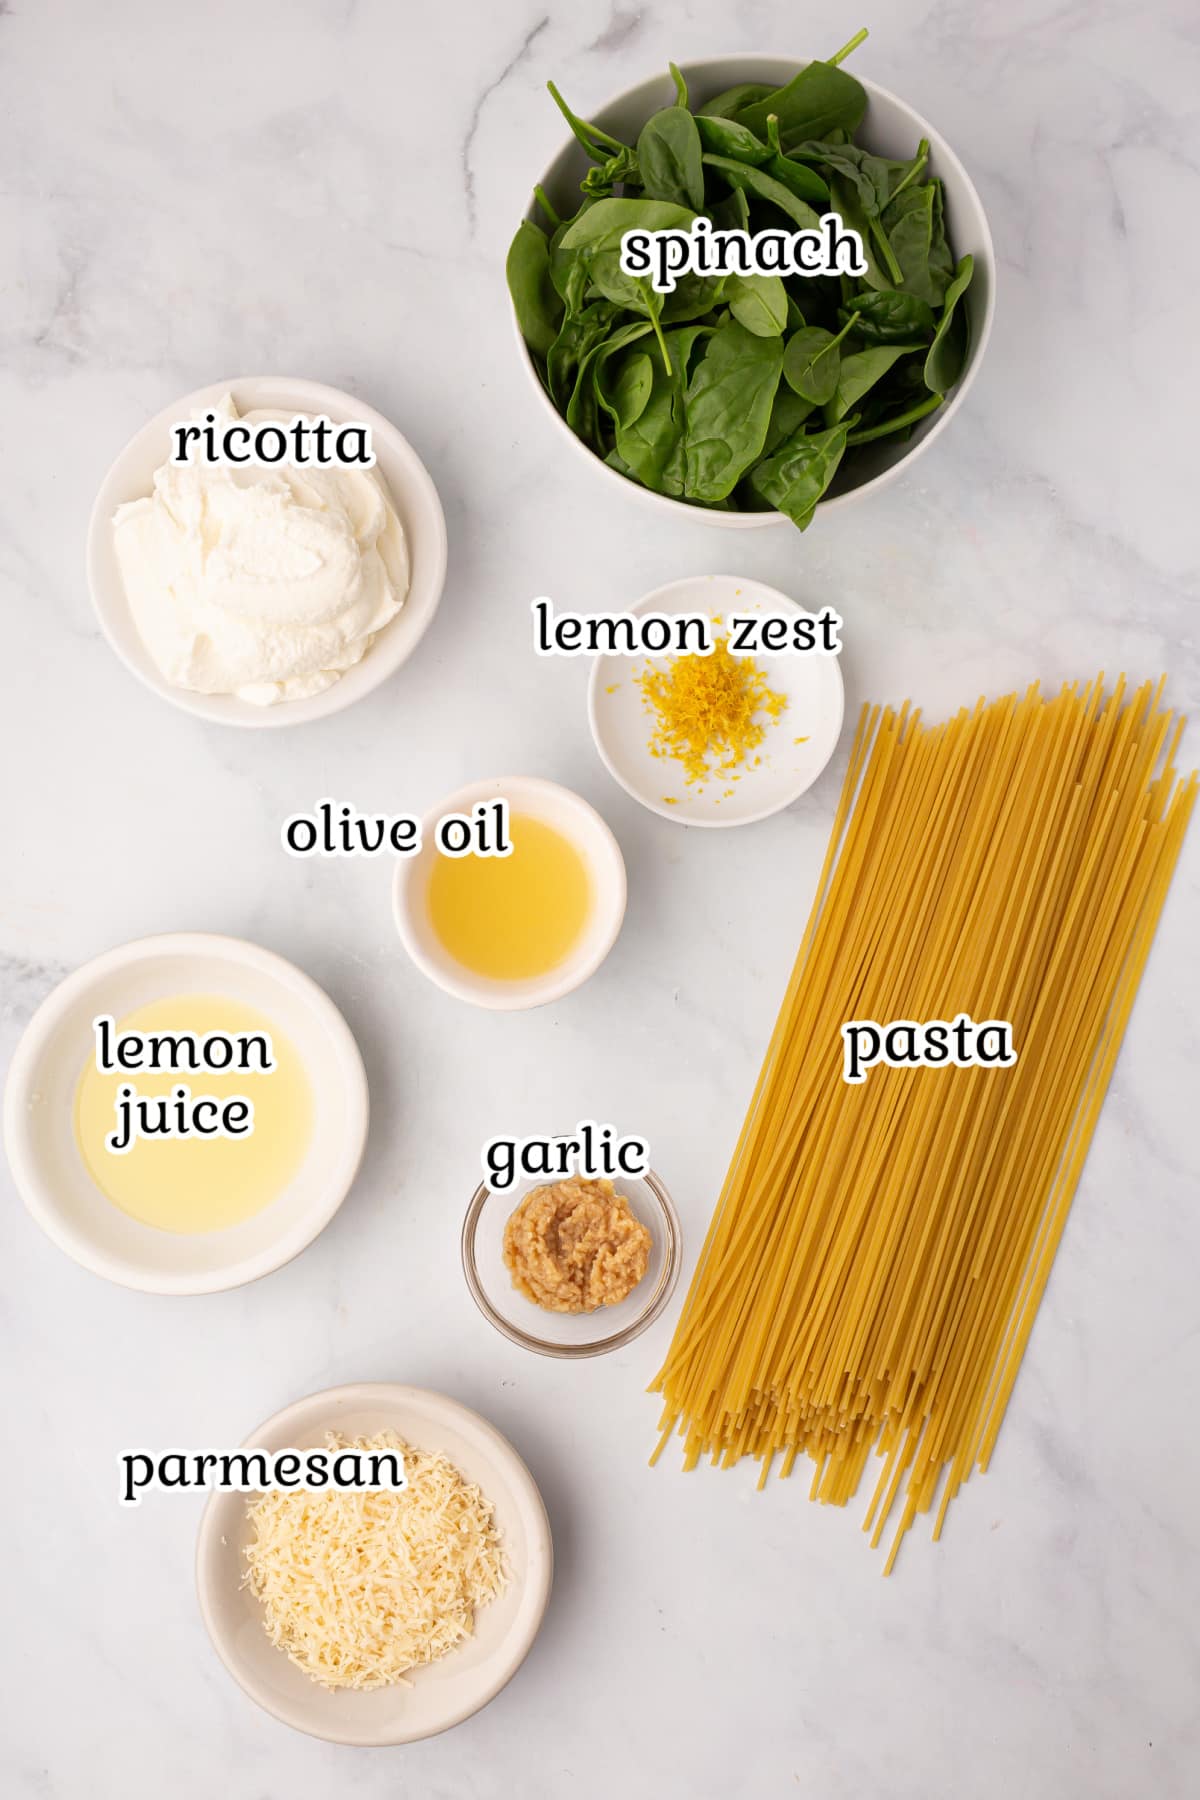 A labeled image of the recipe ingredients.